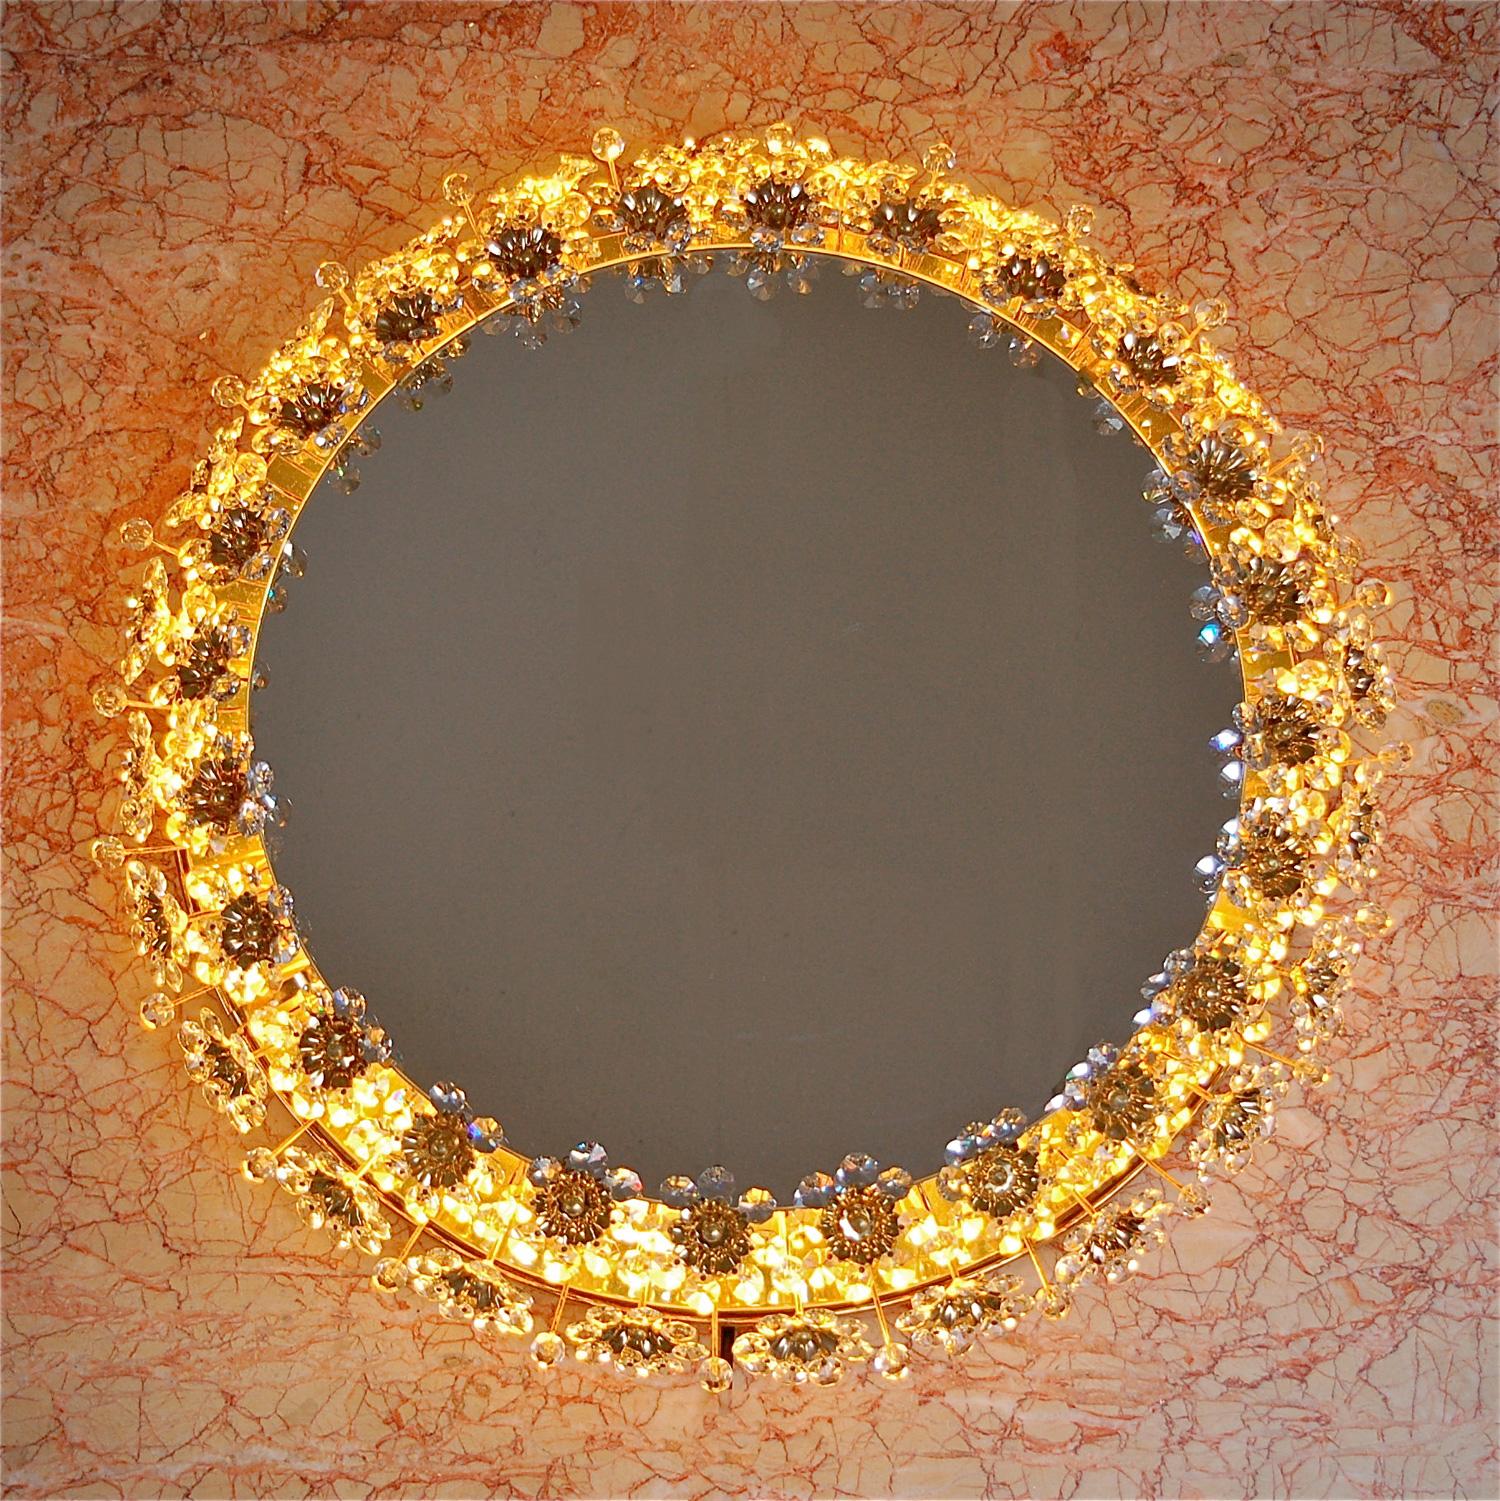 Mid-Century Modern Circular Backlit Mirror with Crystal Flowers by Palwa, circa 1960s